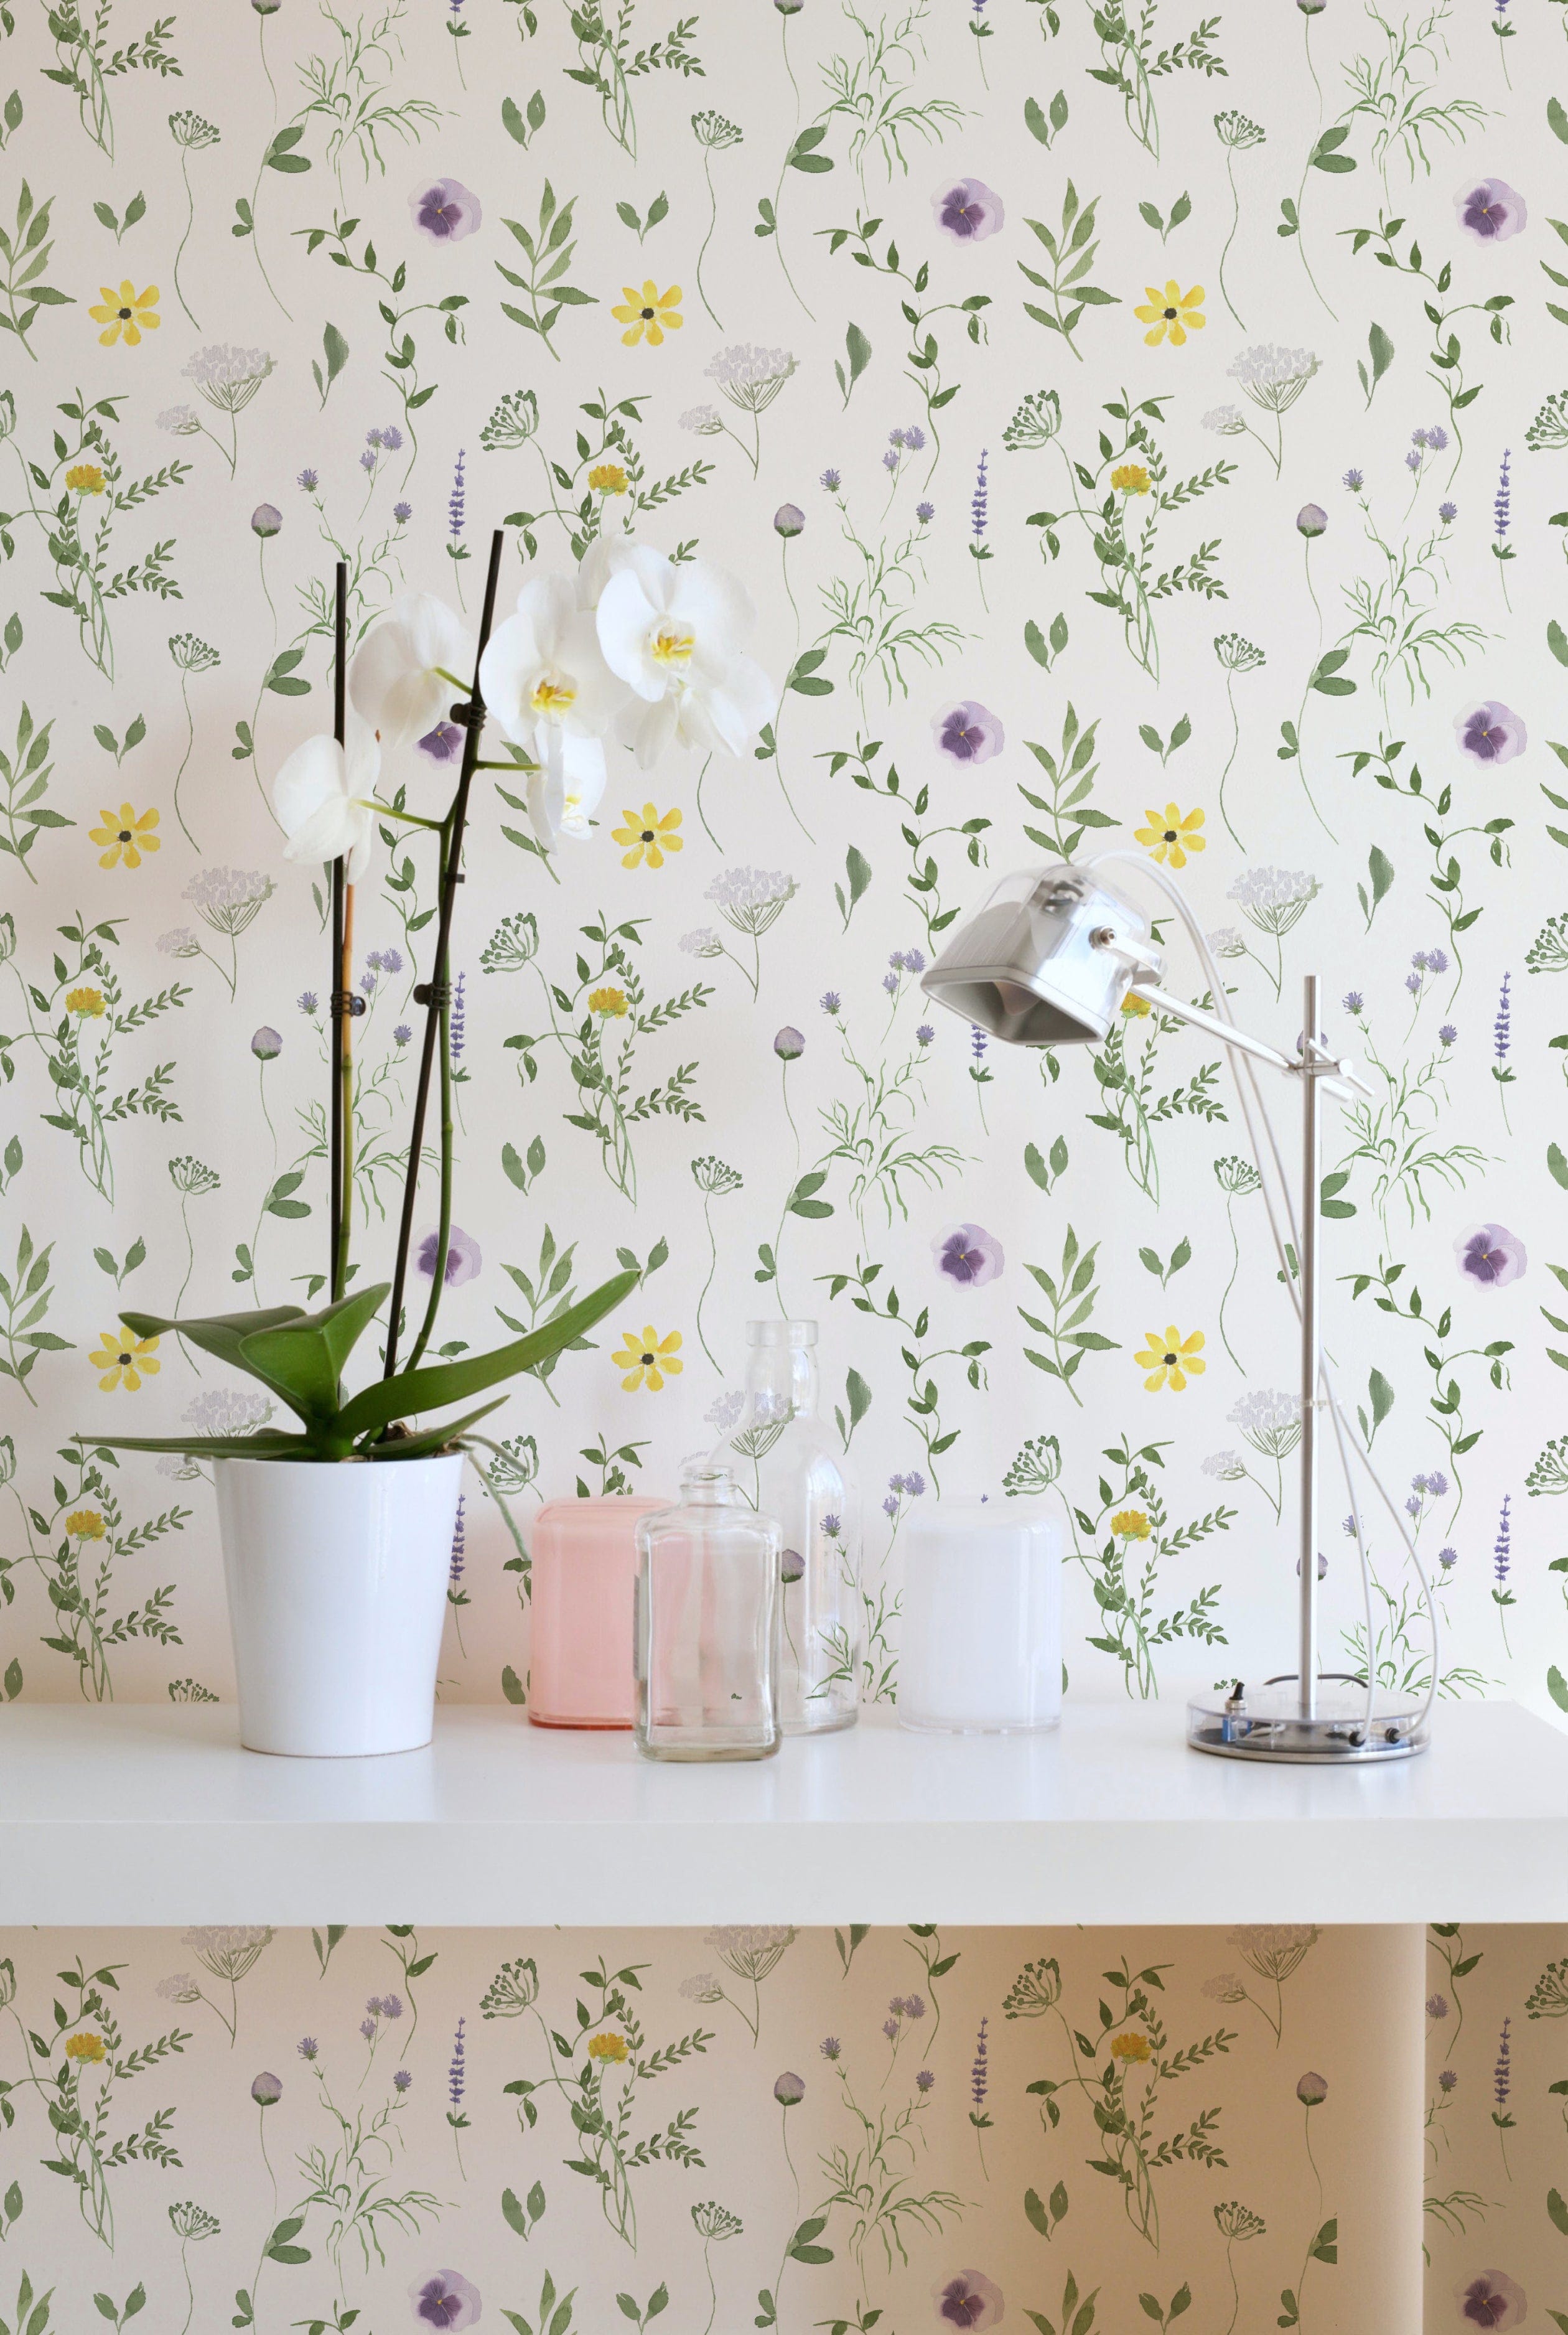 A stylish room corner with the Spring Field Wallpaper - VII, featuring a white orchid in a pot and a sleek metallic desk lamp on a white desk. The wallpaper's design includes purple and yellow flowers and green foliage